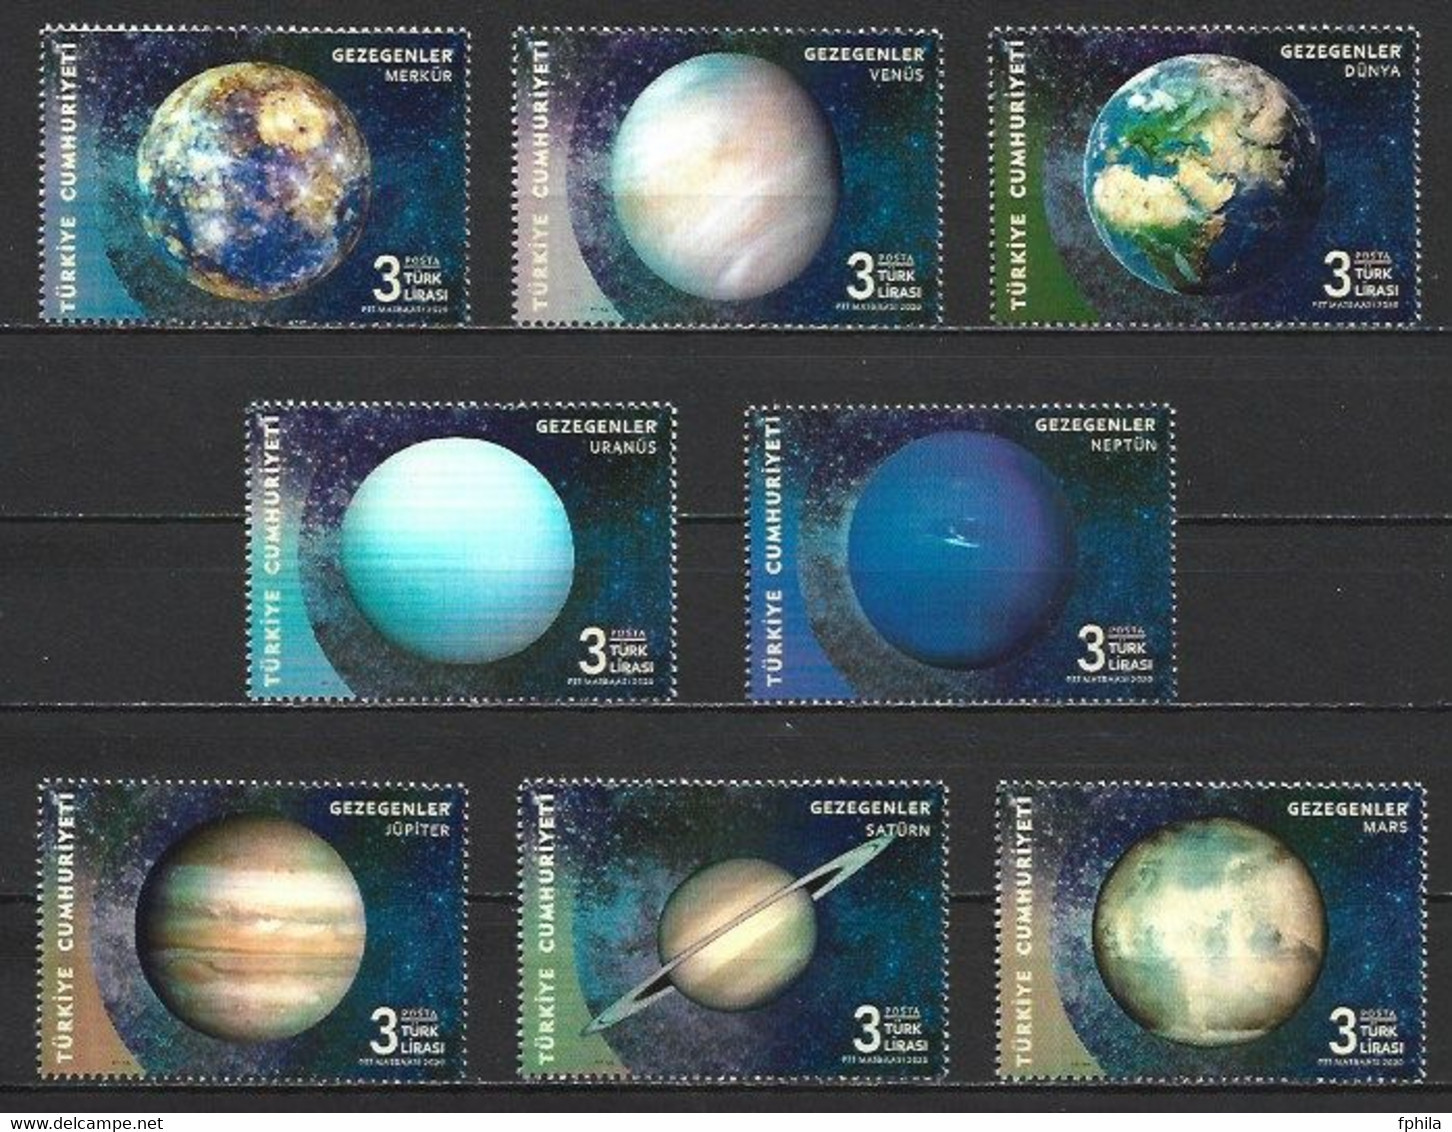 2020 TURKEY THE PLANETS BOOKLET STAMPS MNH ** - Unused Stamps